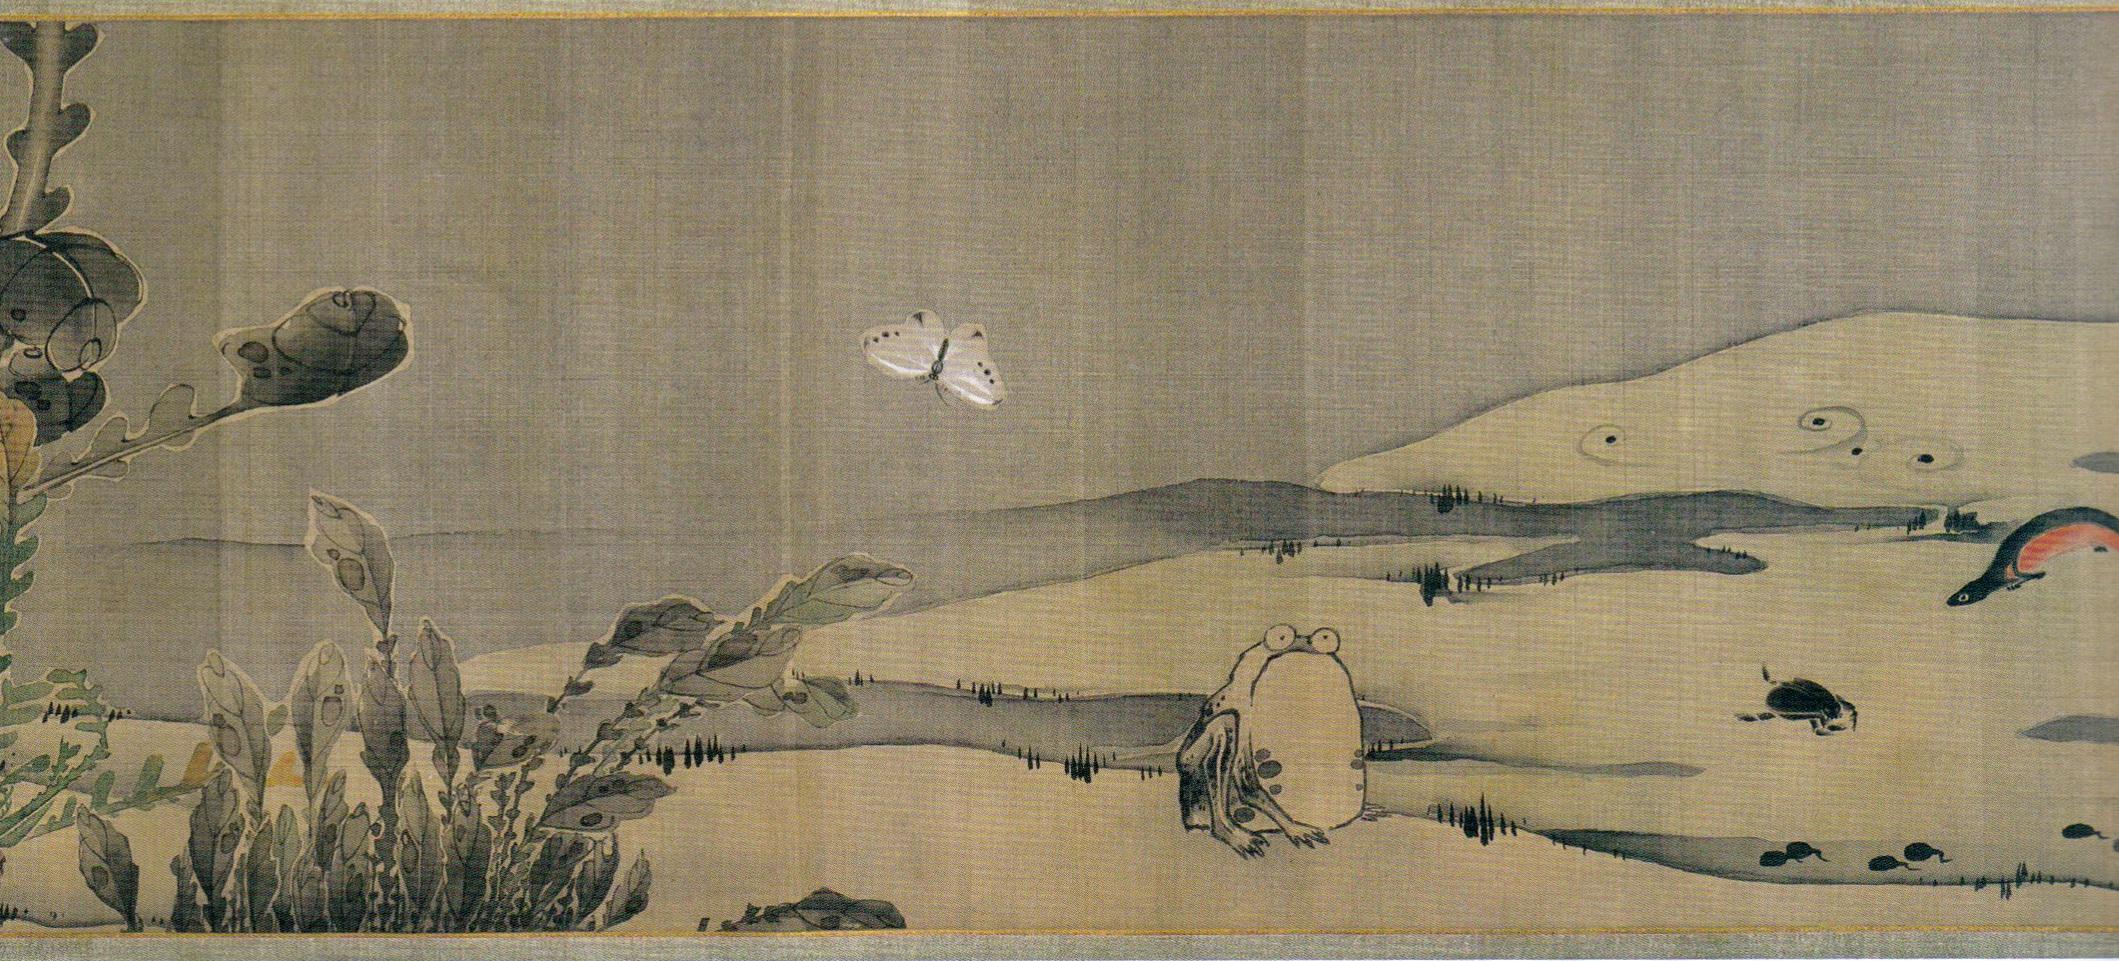 Detail from silk painting titled Sai Chu-fu (Vegetables and Insects) by Ito Jakuchu. Japan, 1790.jpg